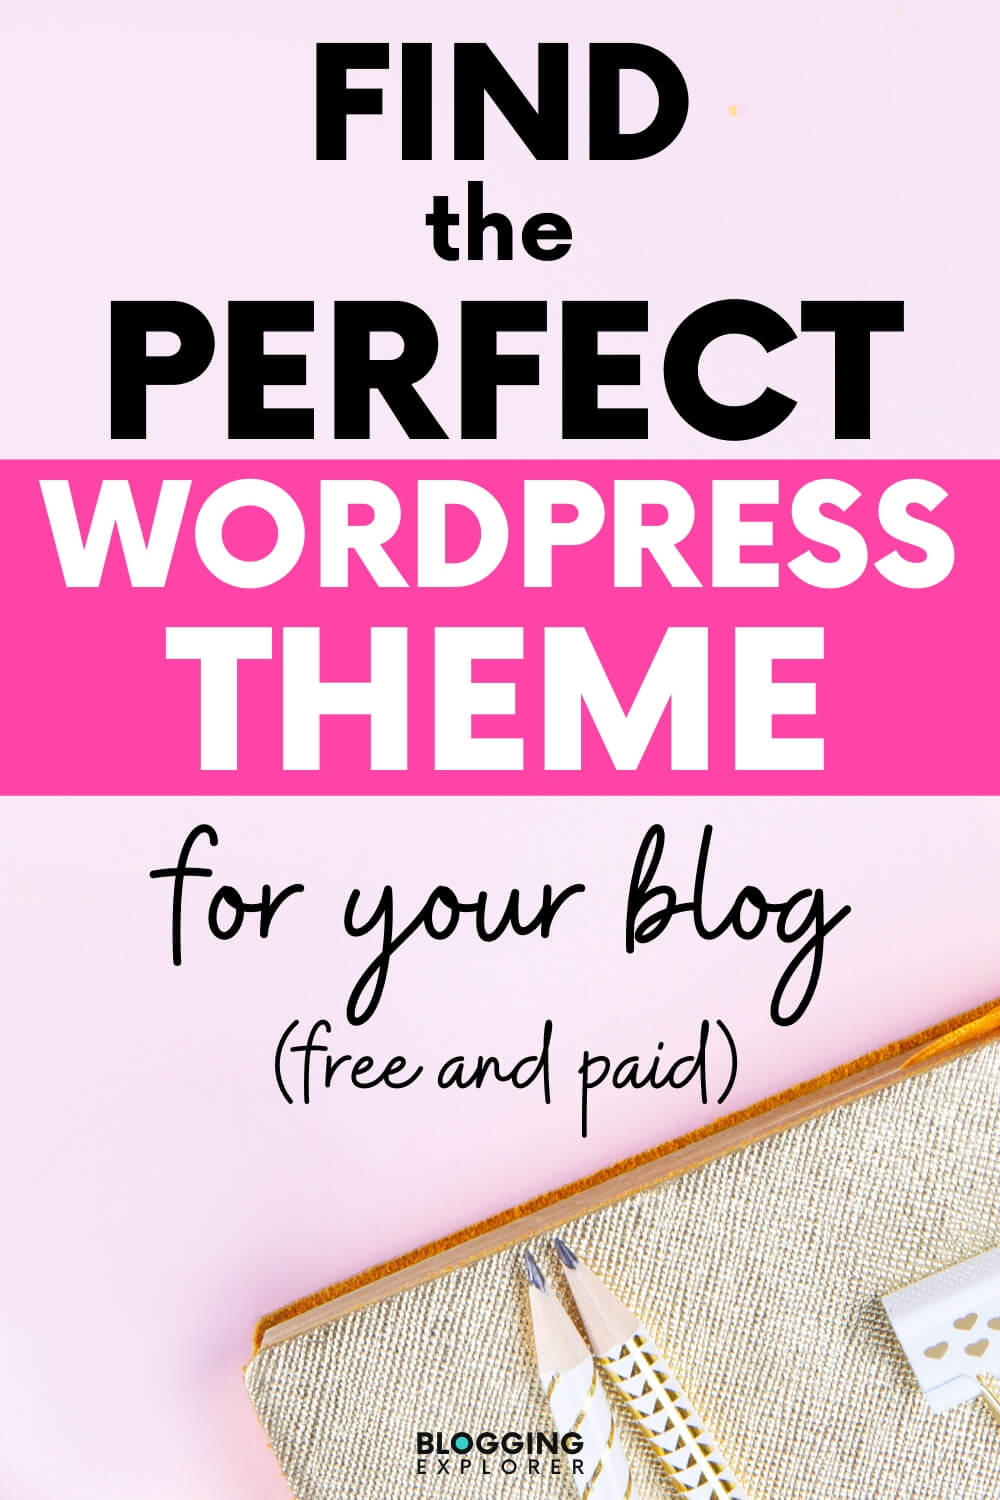 The Best WordPress Themes For Blogs (Free and Paid)